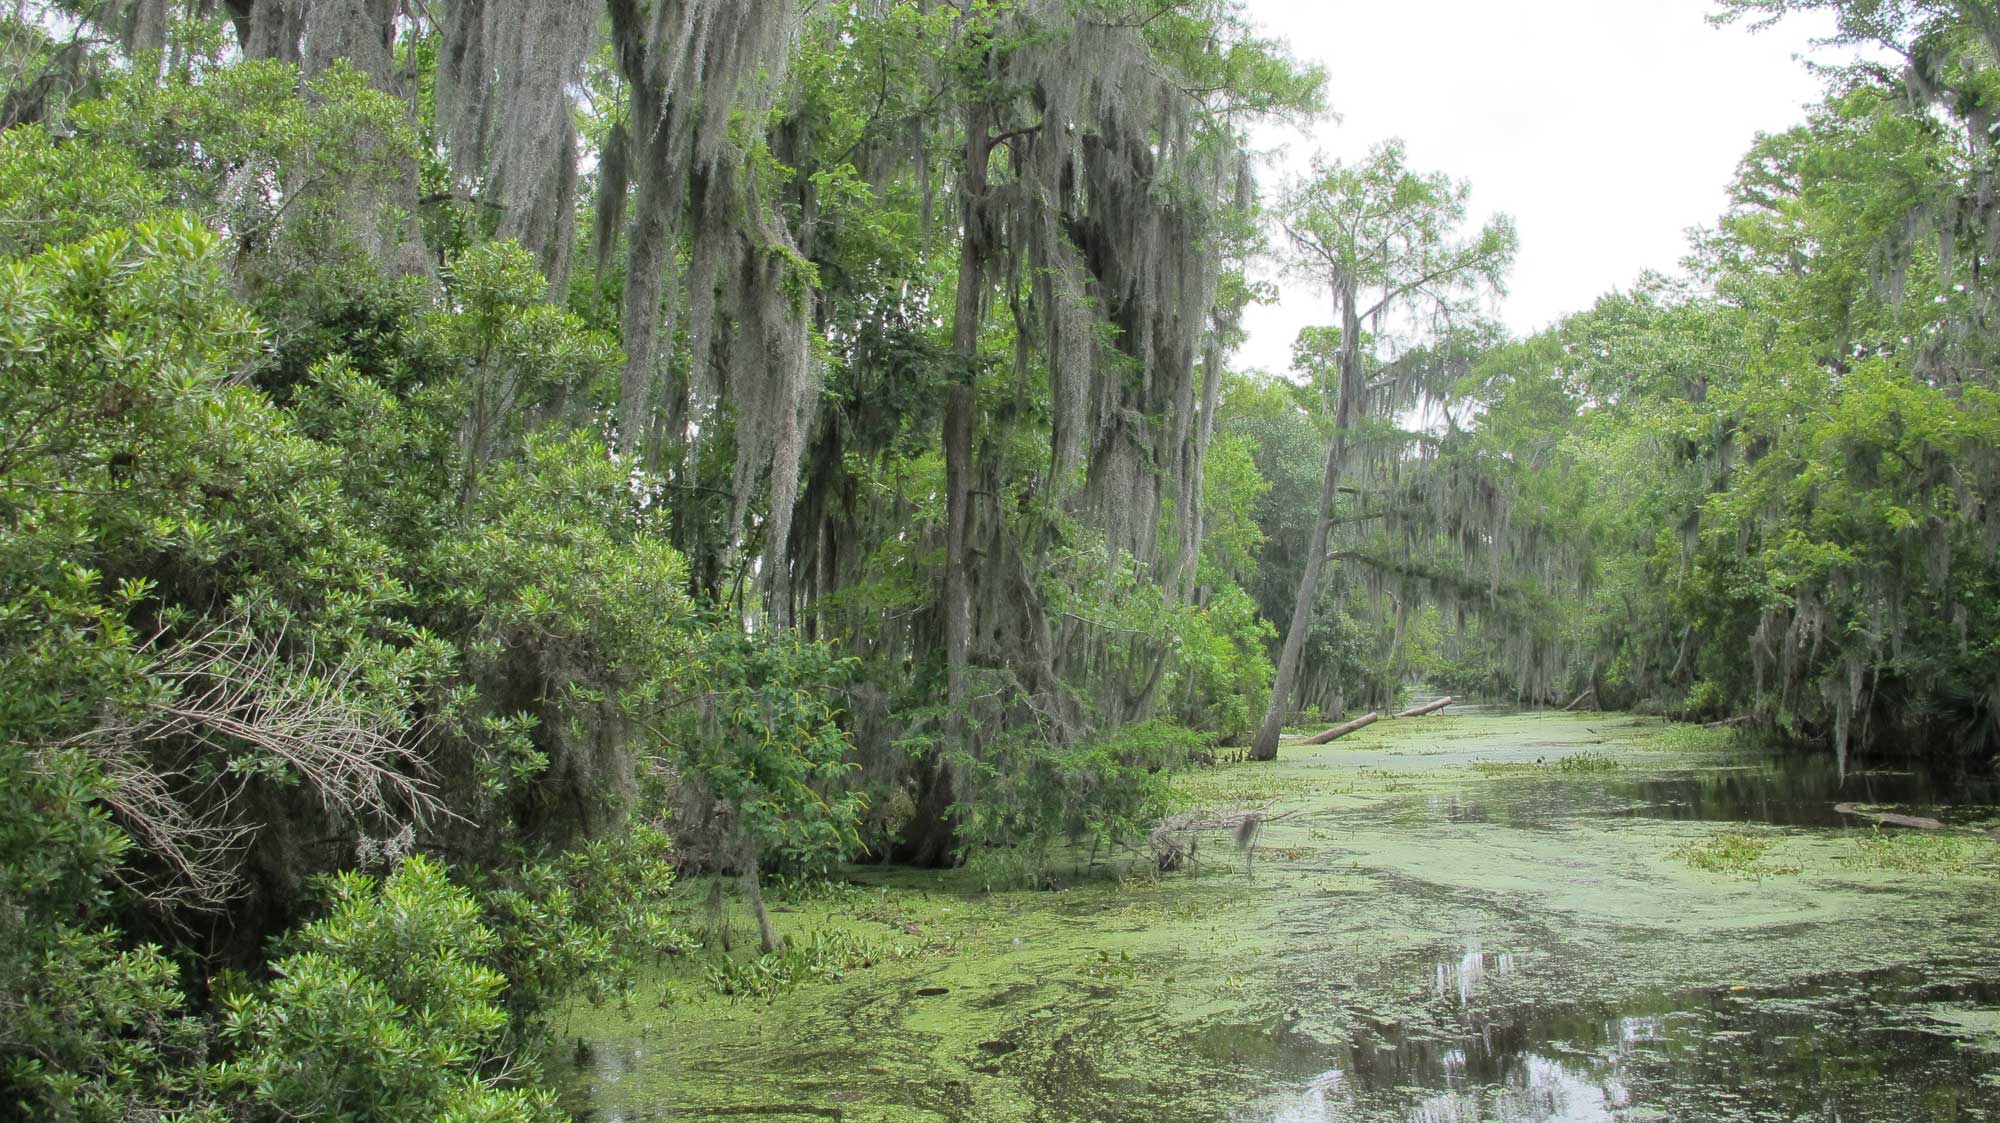 Photo of a Louisiana swamp. The swamp has a waterway covered with green vegetation (duckweed?) with bald cypress on either side, Spanish moss hanging from its branches. A large shrub is also in the left foreground.